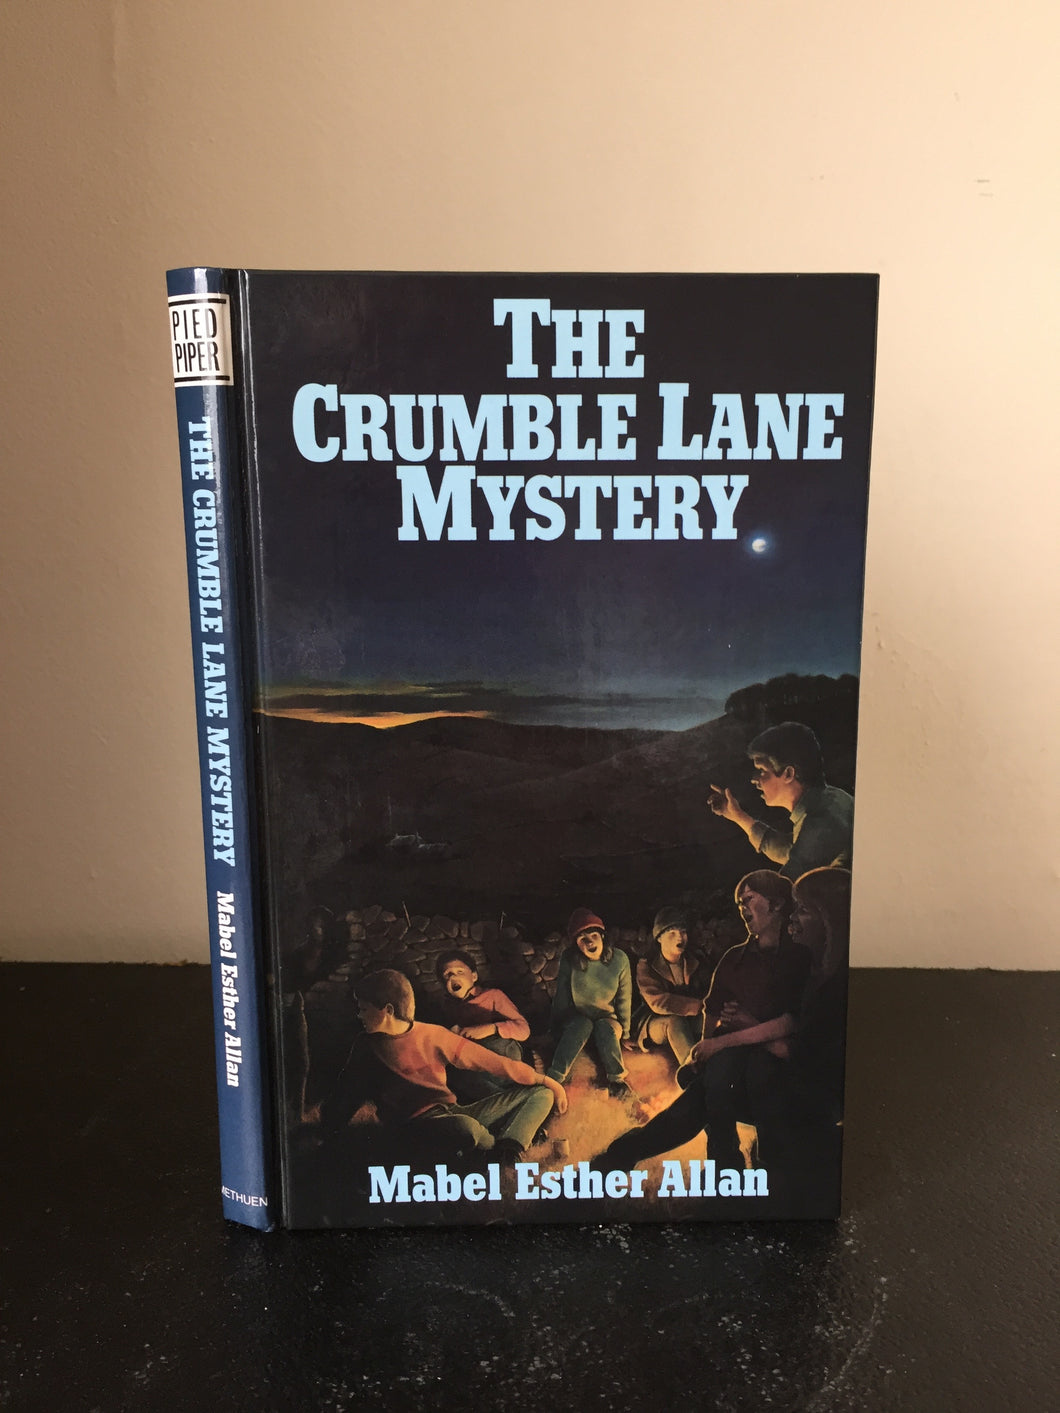 The Crumble Lane Mystery